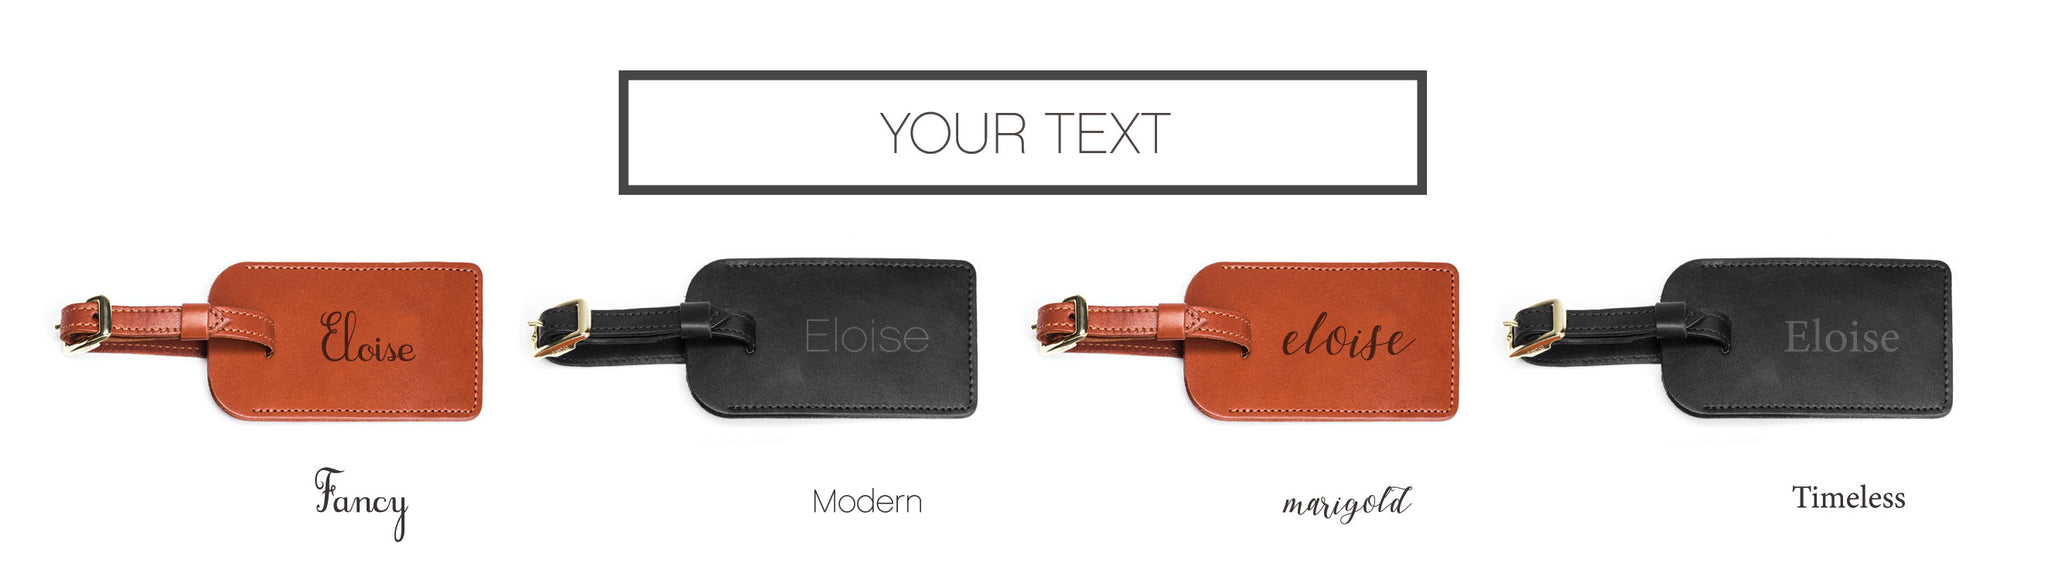 Luggage Tag Text Personalization Options